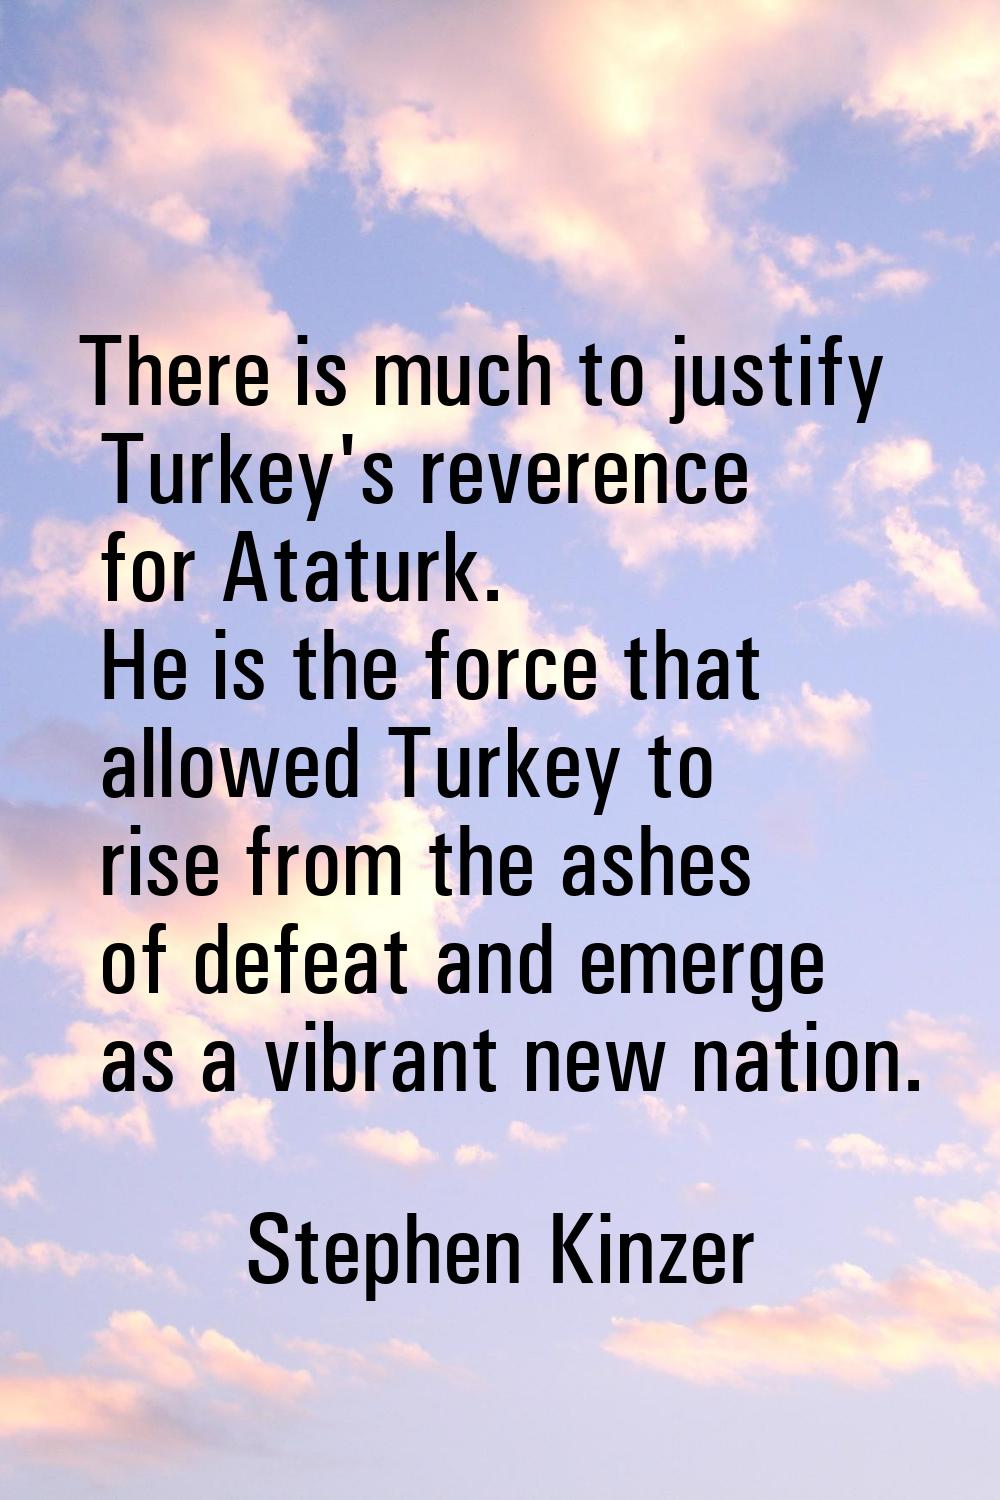 There is much to justify Turkey's reverence for Ataturk. He is the force that allowed Turkey to ris